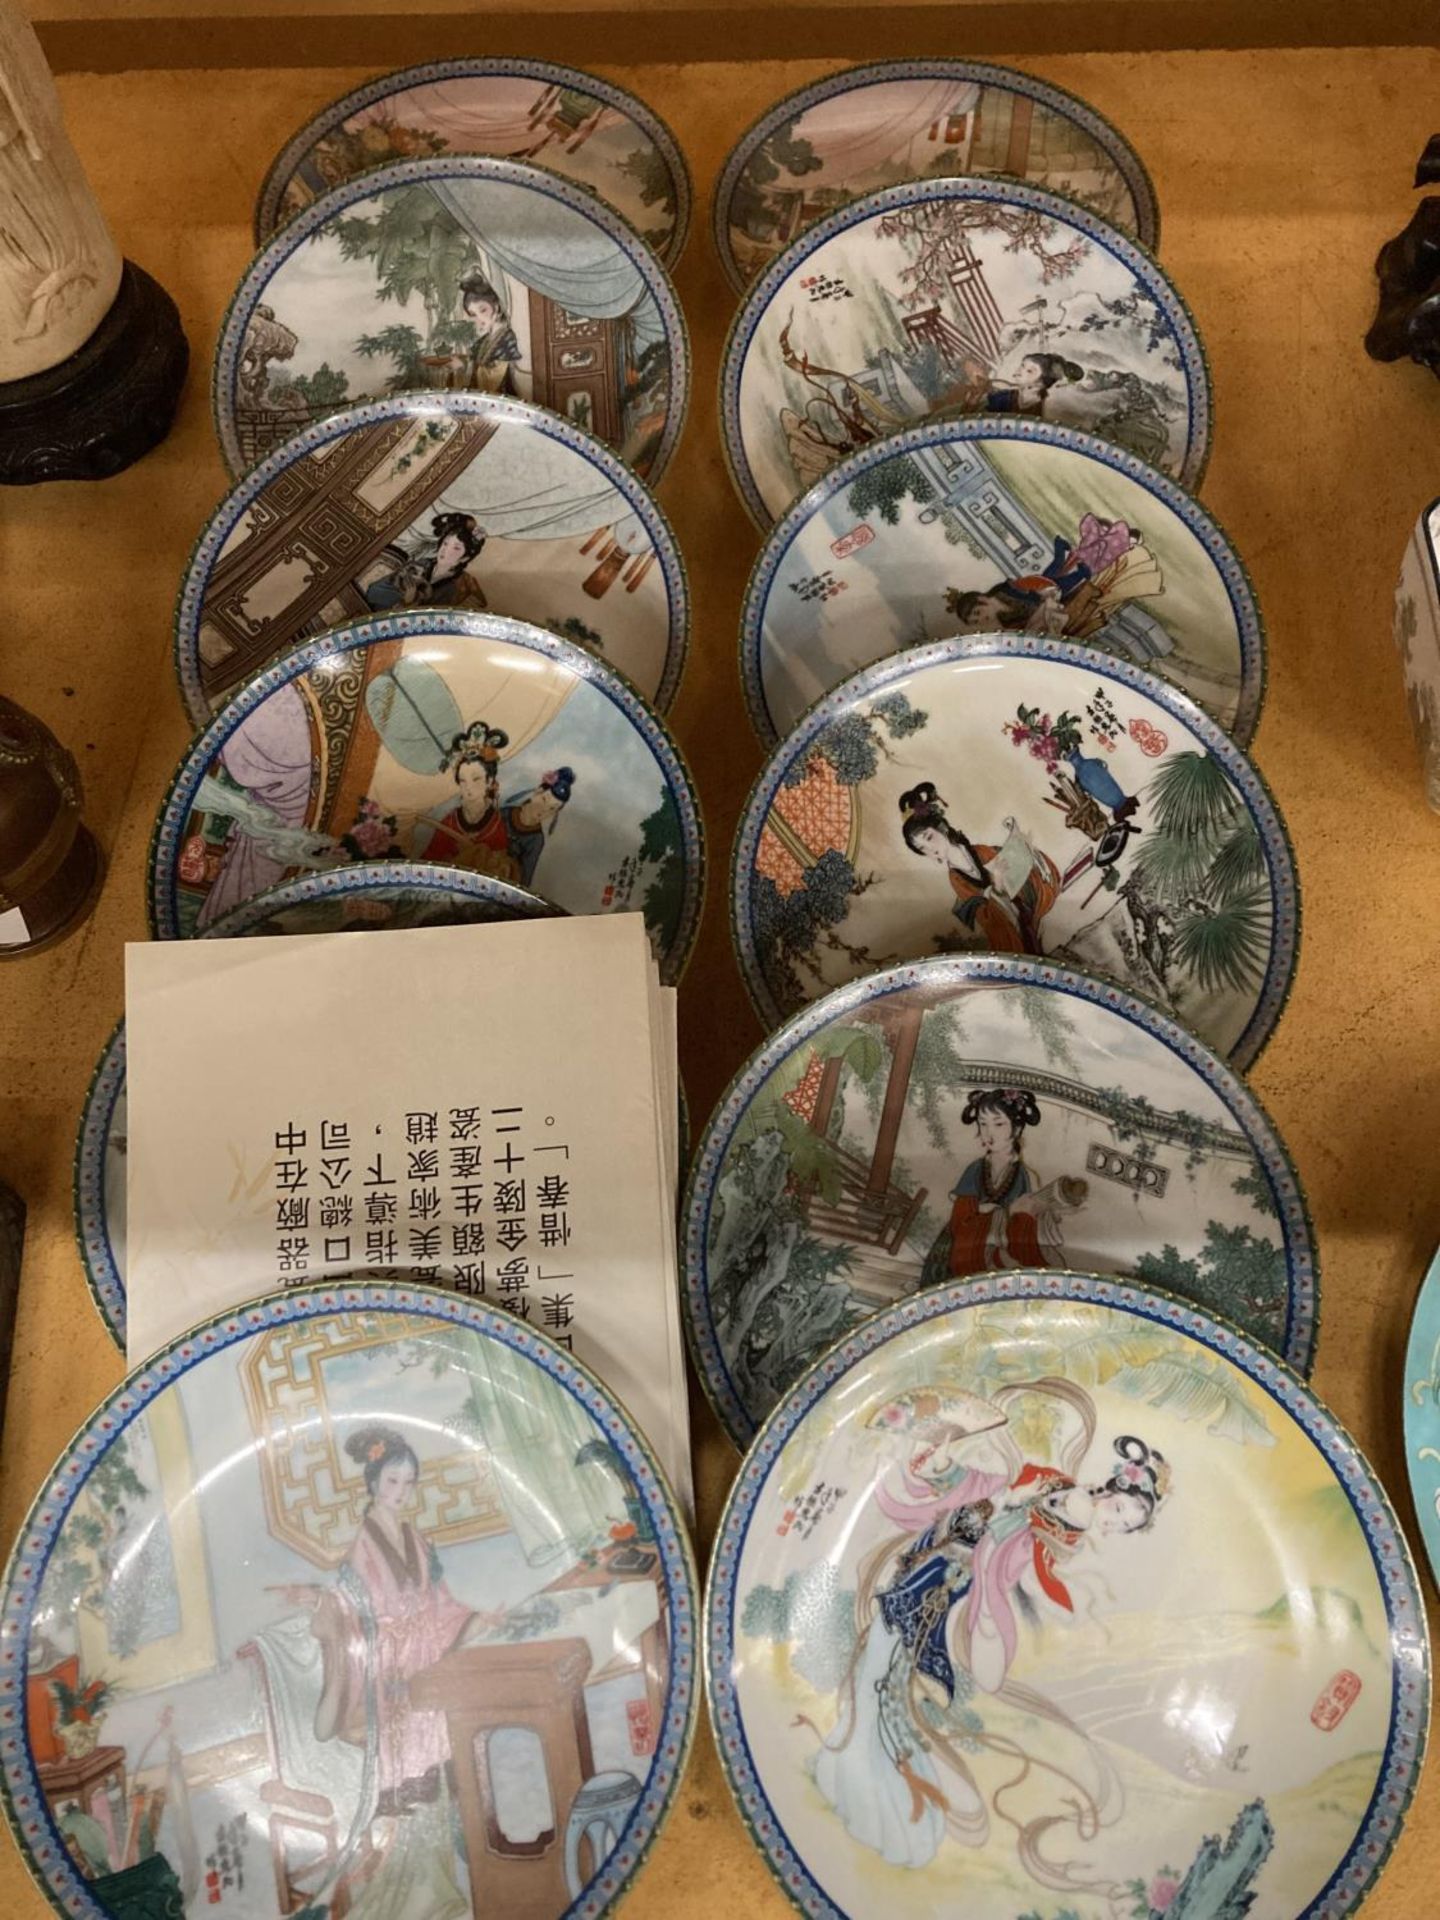 TWELVE VINTAGE CHINESE IMPERIAL JINGDEZHEN PORCELAIN PLATES BY MASTER ARTISAN ZHAO HUIMIN "